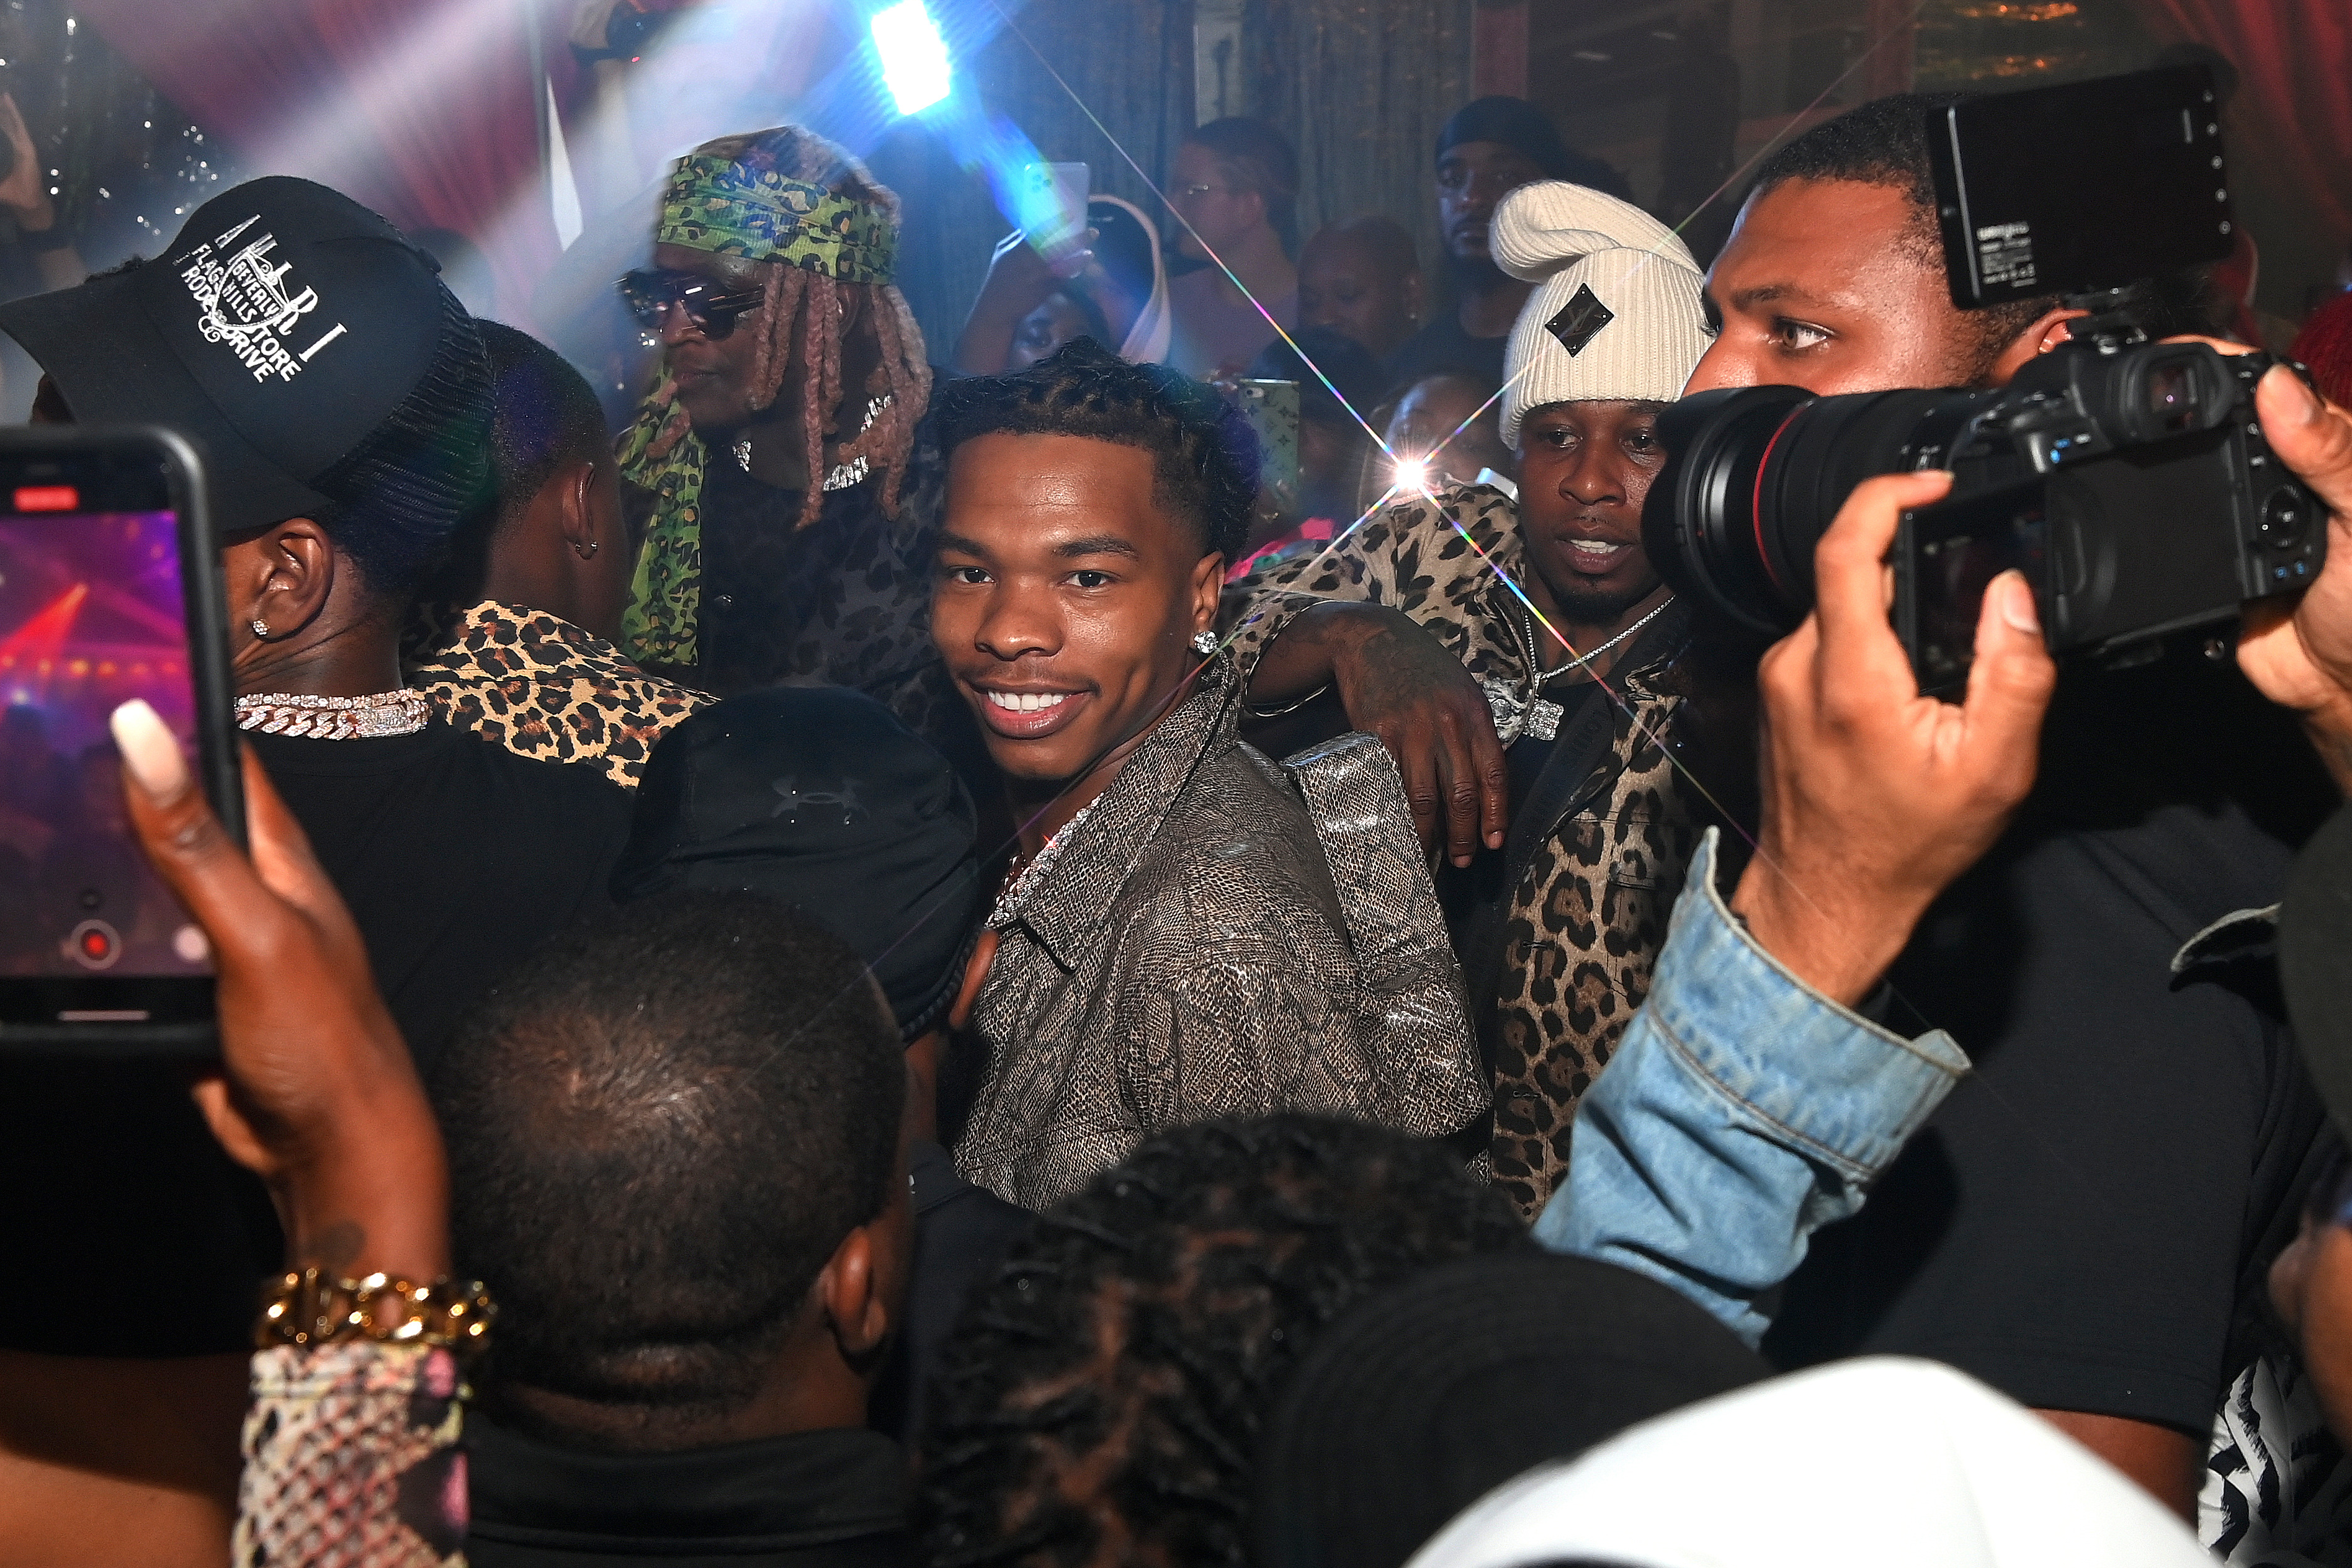 Thug Party Porn - Lil Baby, Travis Scott & More Attend Young Thug's Striped & Spotted Bash